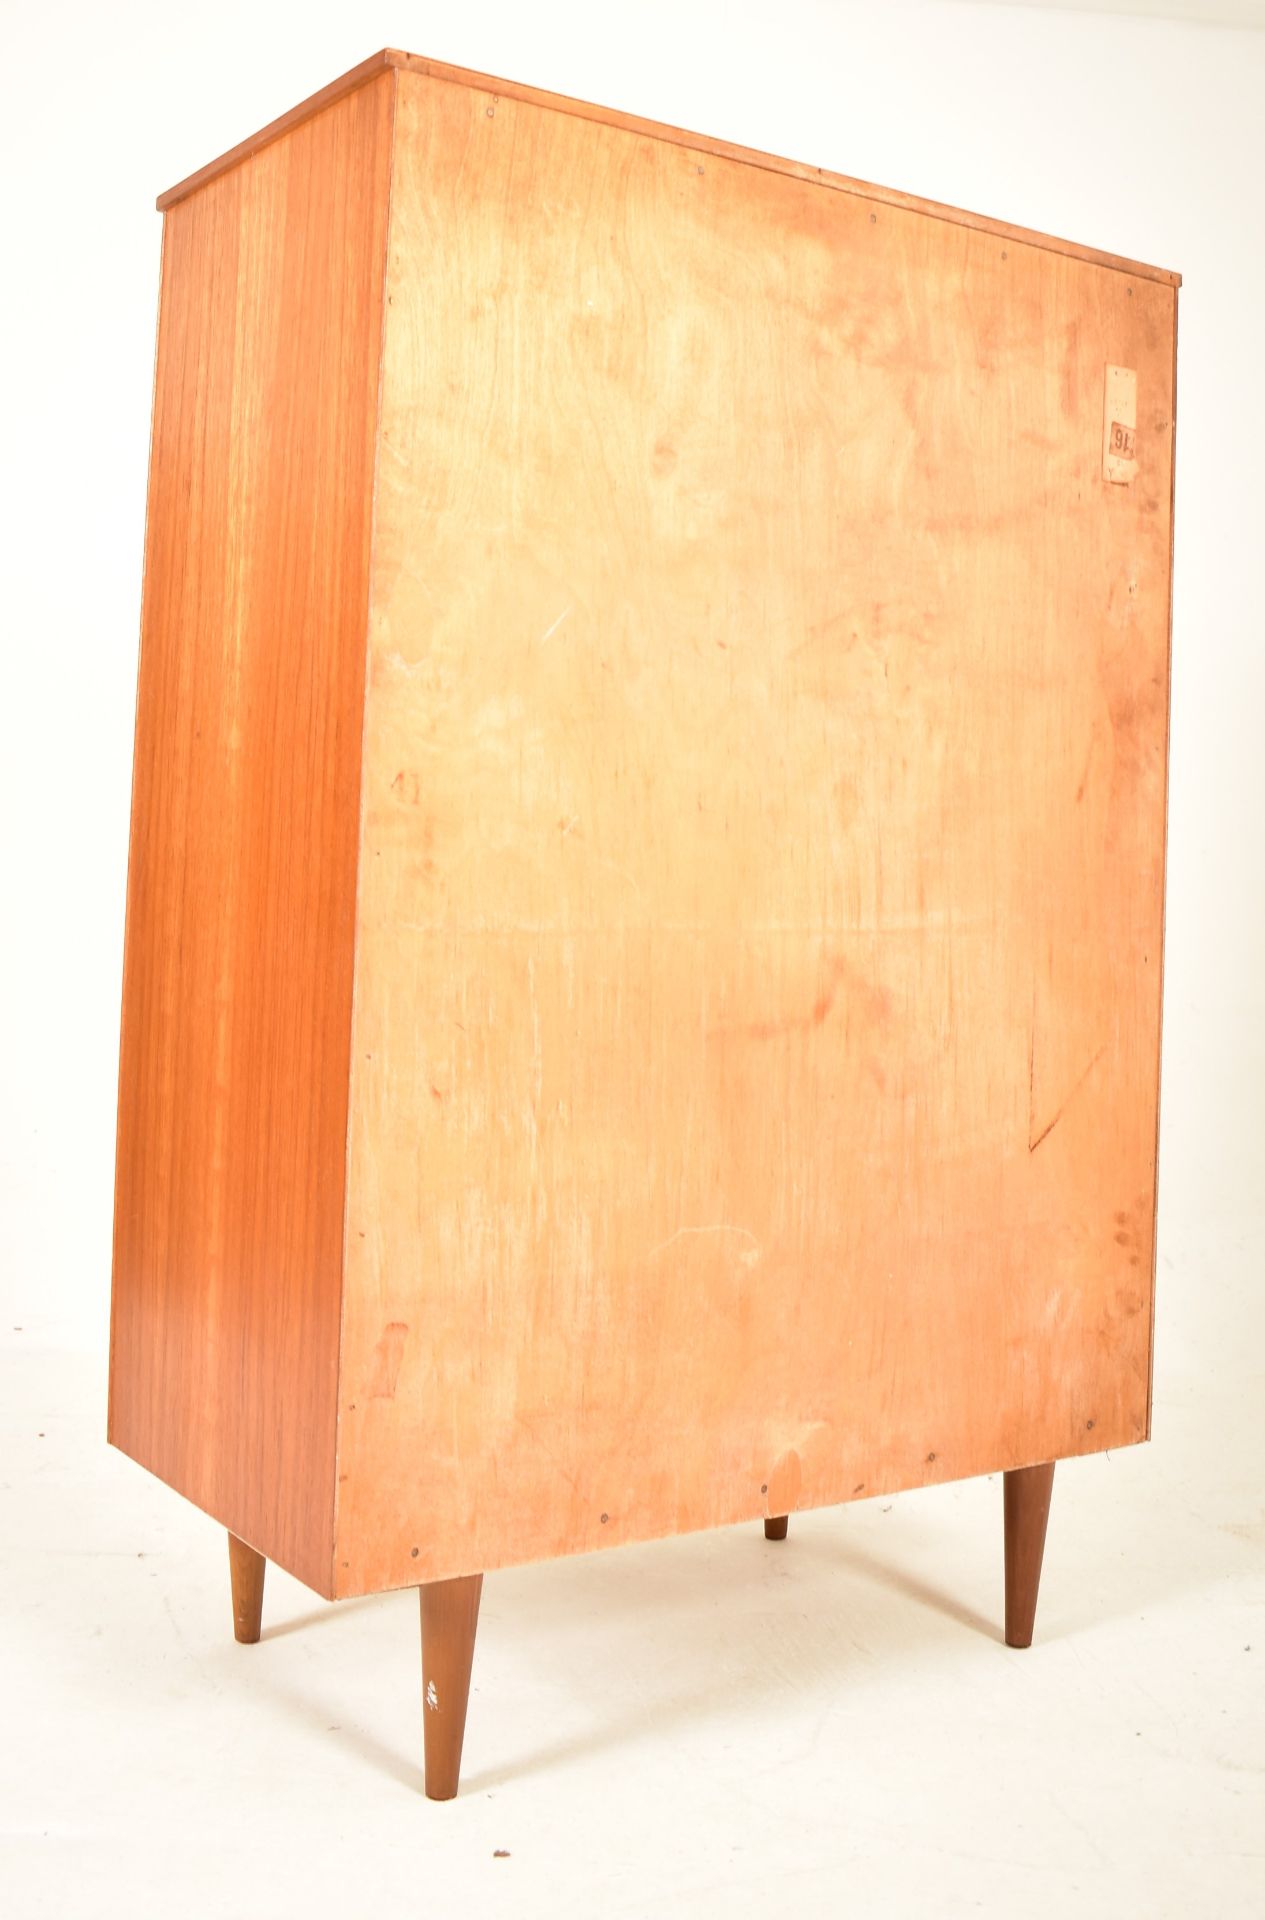 LEBUS FURNITURE - MID CENTURY TEAK UPRIGHT CHEST OF DRAWERS - Image 5 of 5